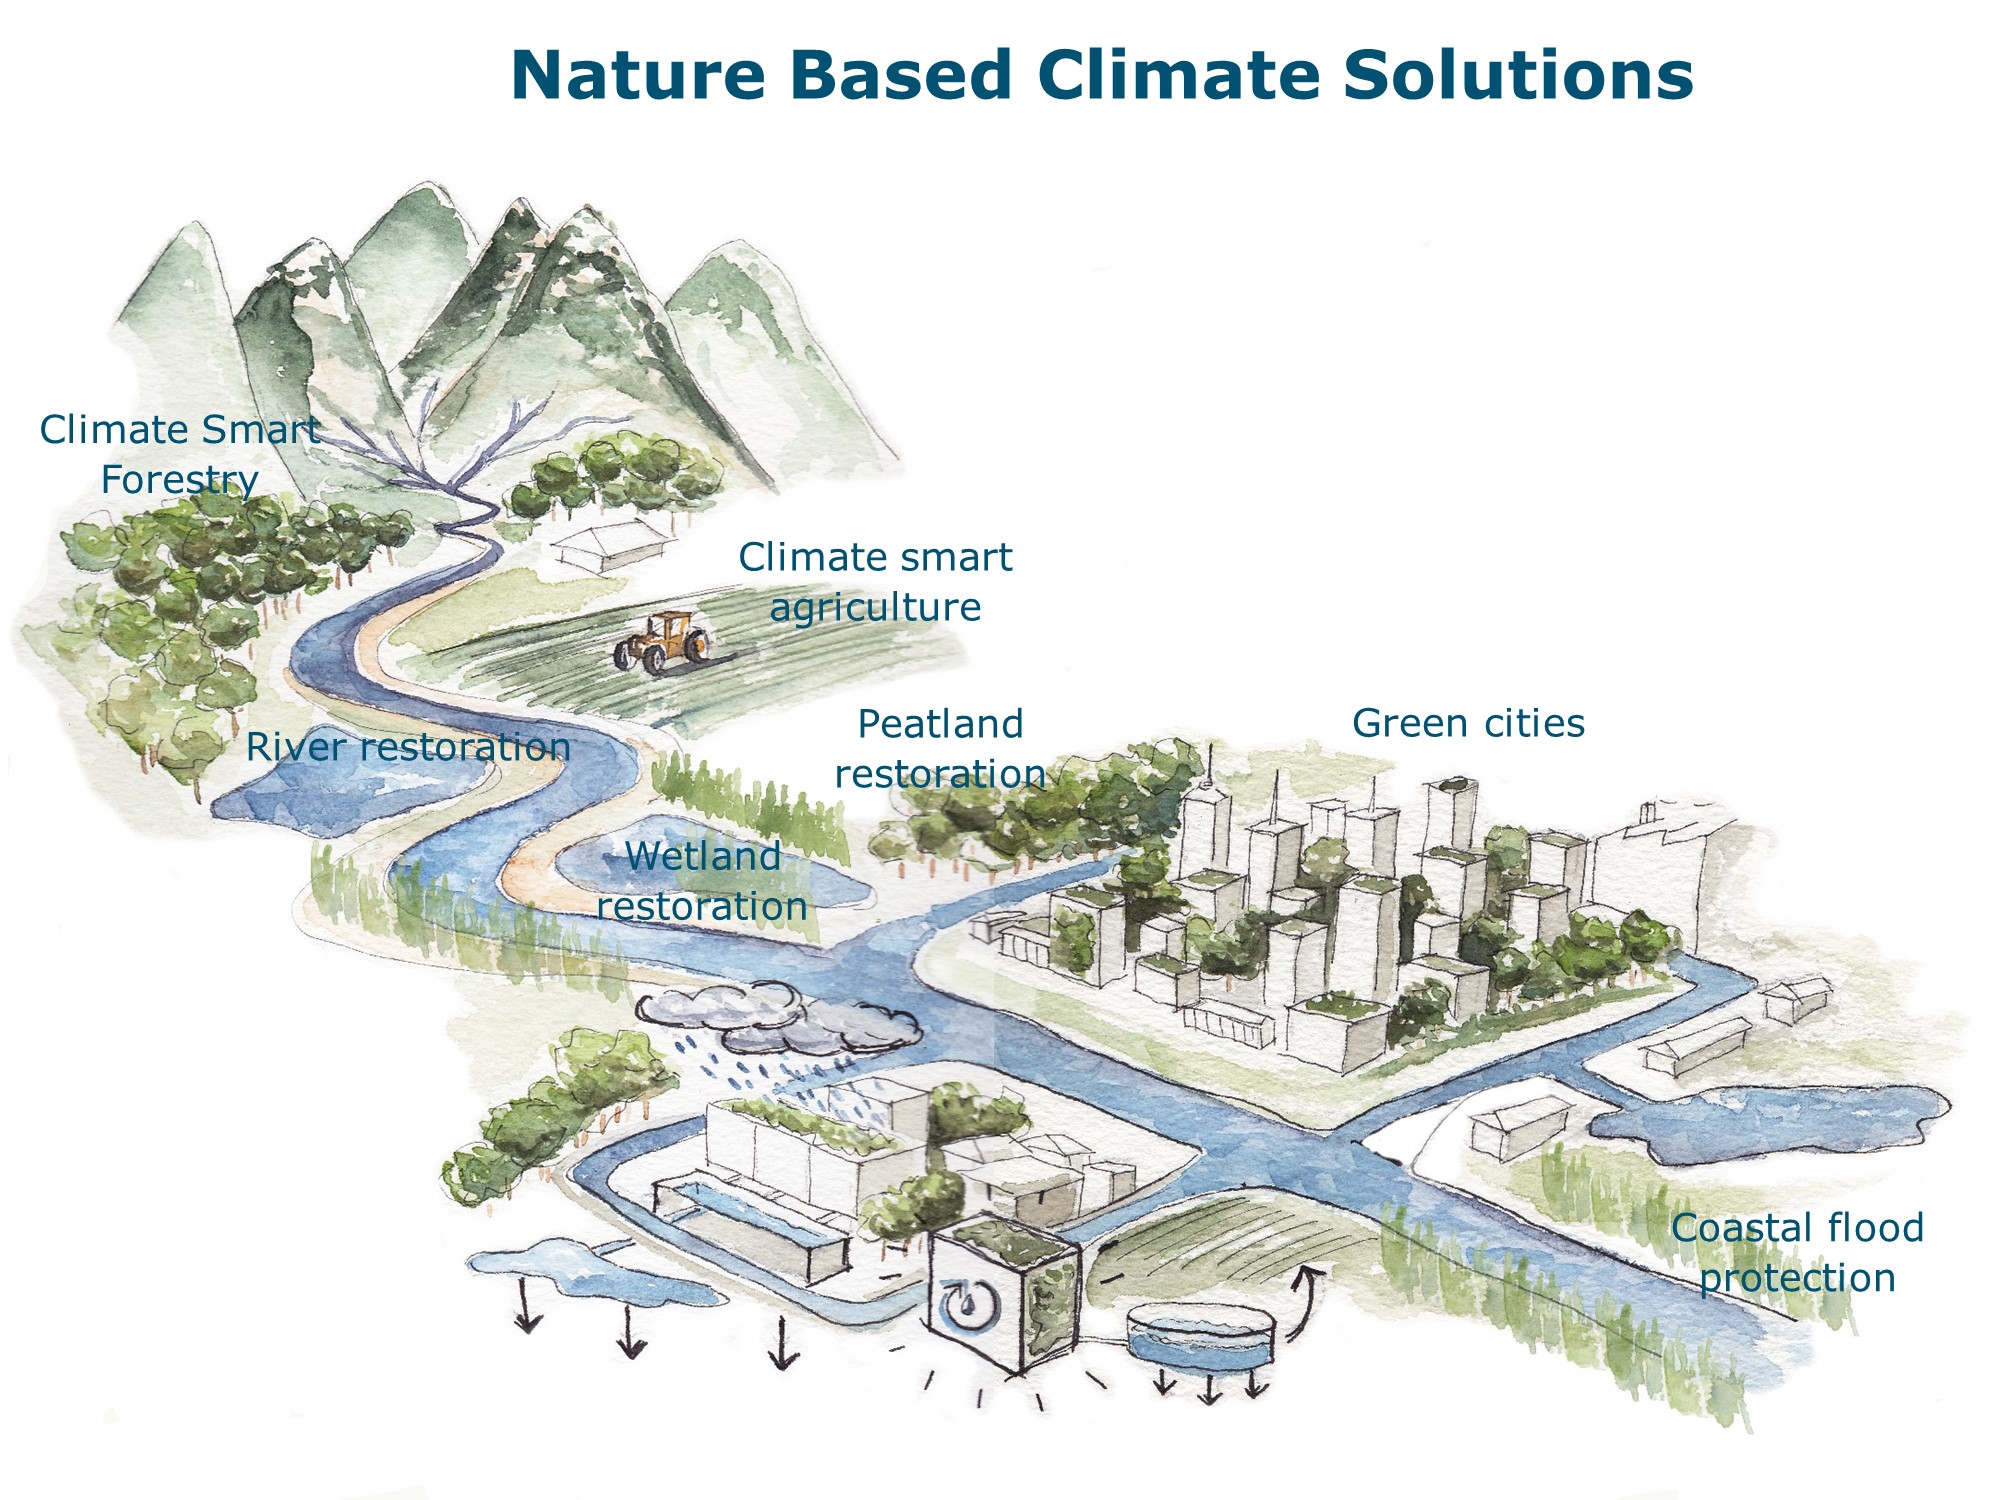 Nature-Based Solutions are a new focal point in the global effort to deal with climate change. Graphic: Natasha de Sena, WER